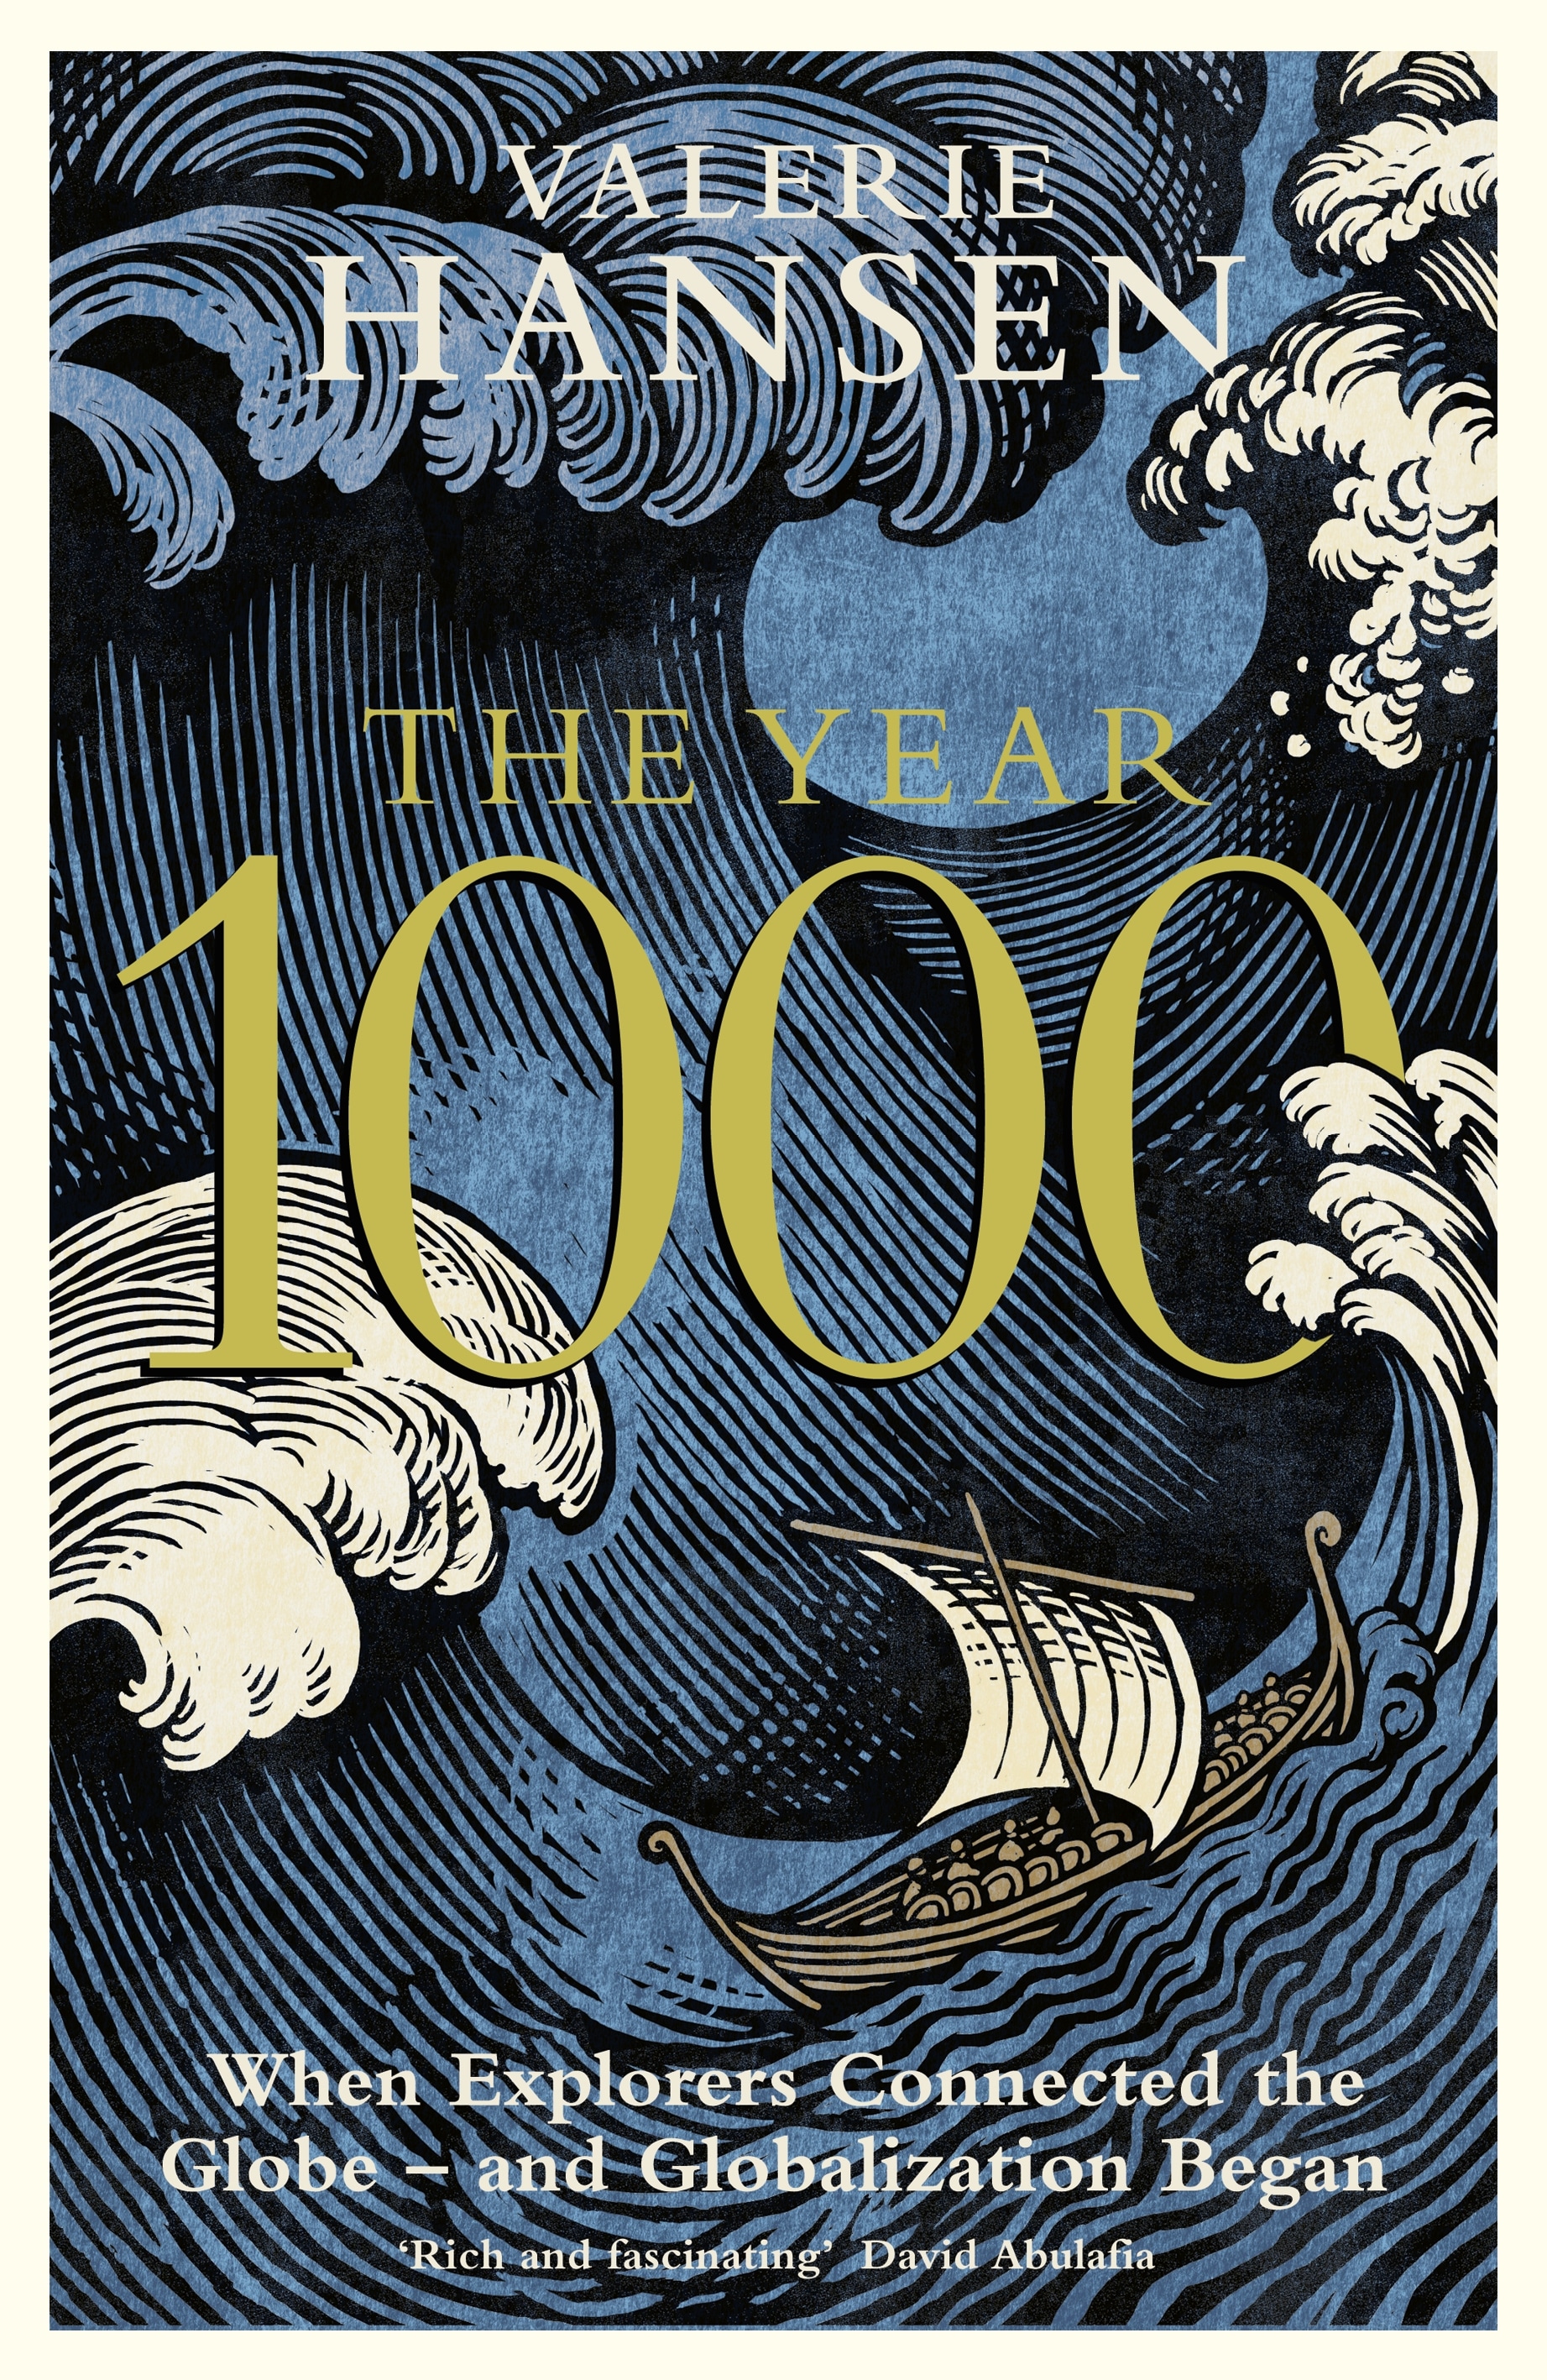 Book “The Year 1000” by Valerie Hansen — April 16, 2020